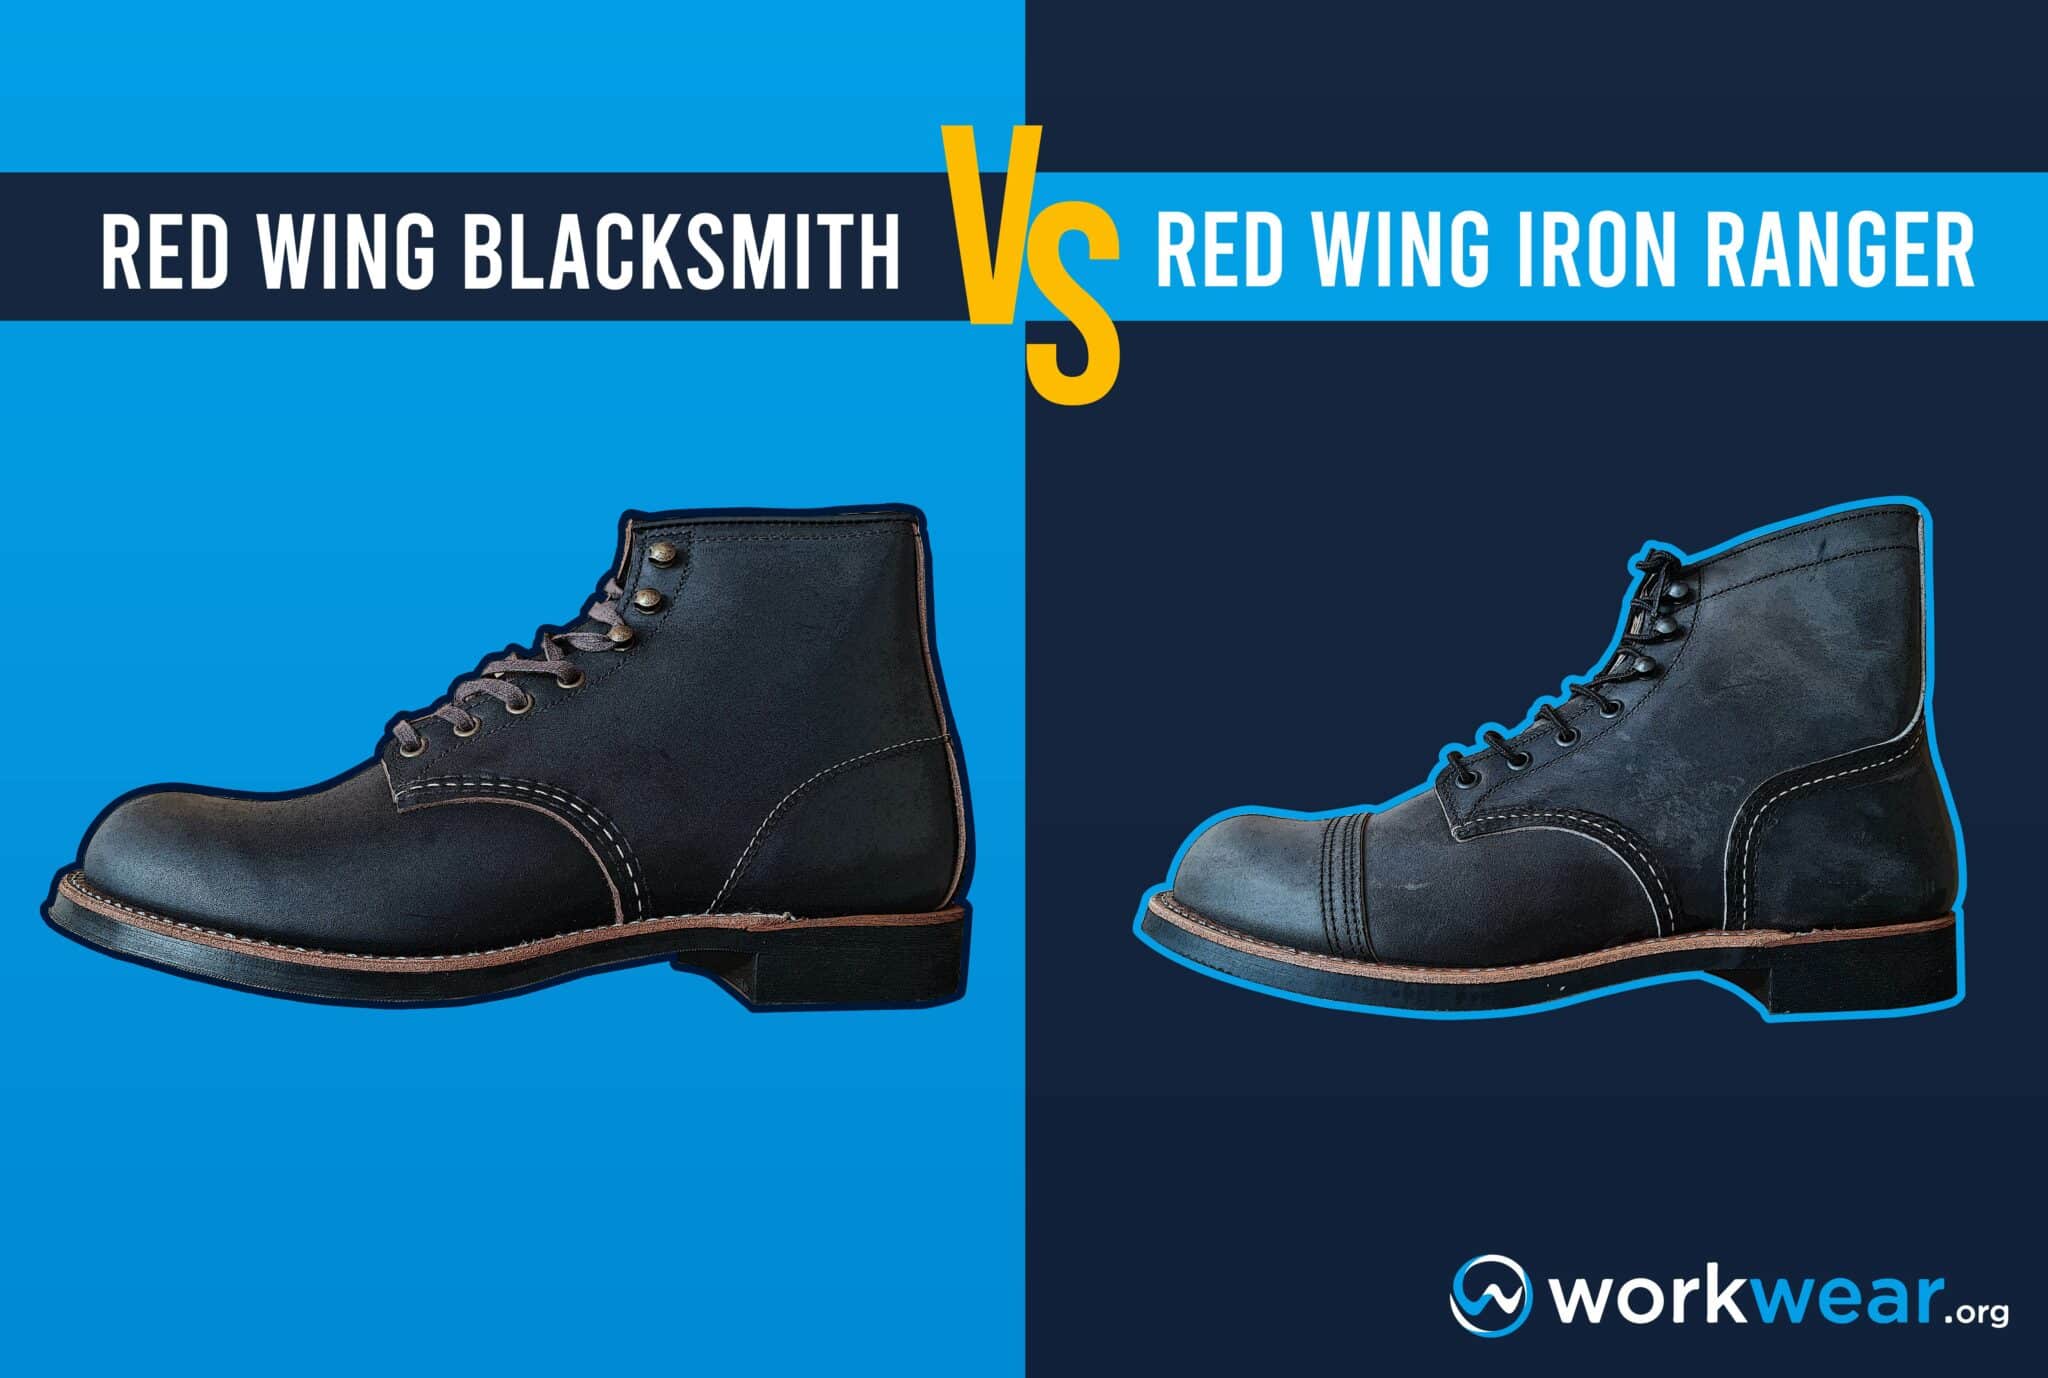 Red Wing Iron Ranger VS Blacksmith Boots - Which one wins? | WorkWear.org